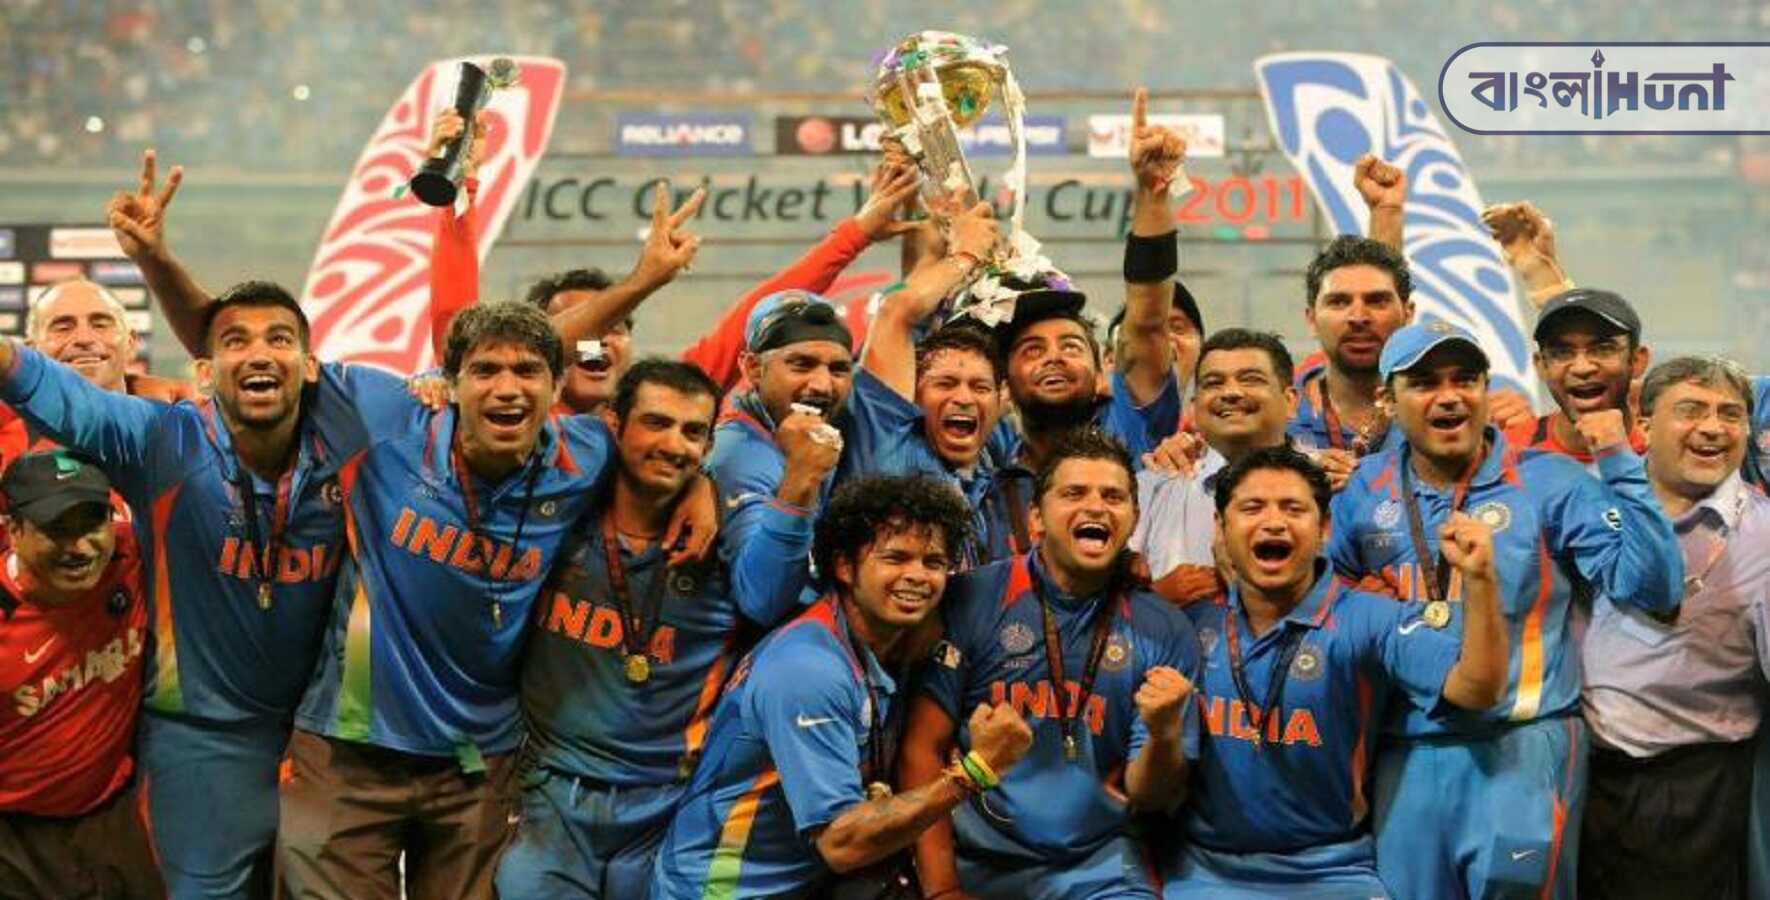 23 июня 2011. 2011 World Cup indian Team. Индия 2011 год. Indian Cup. India and World.